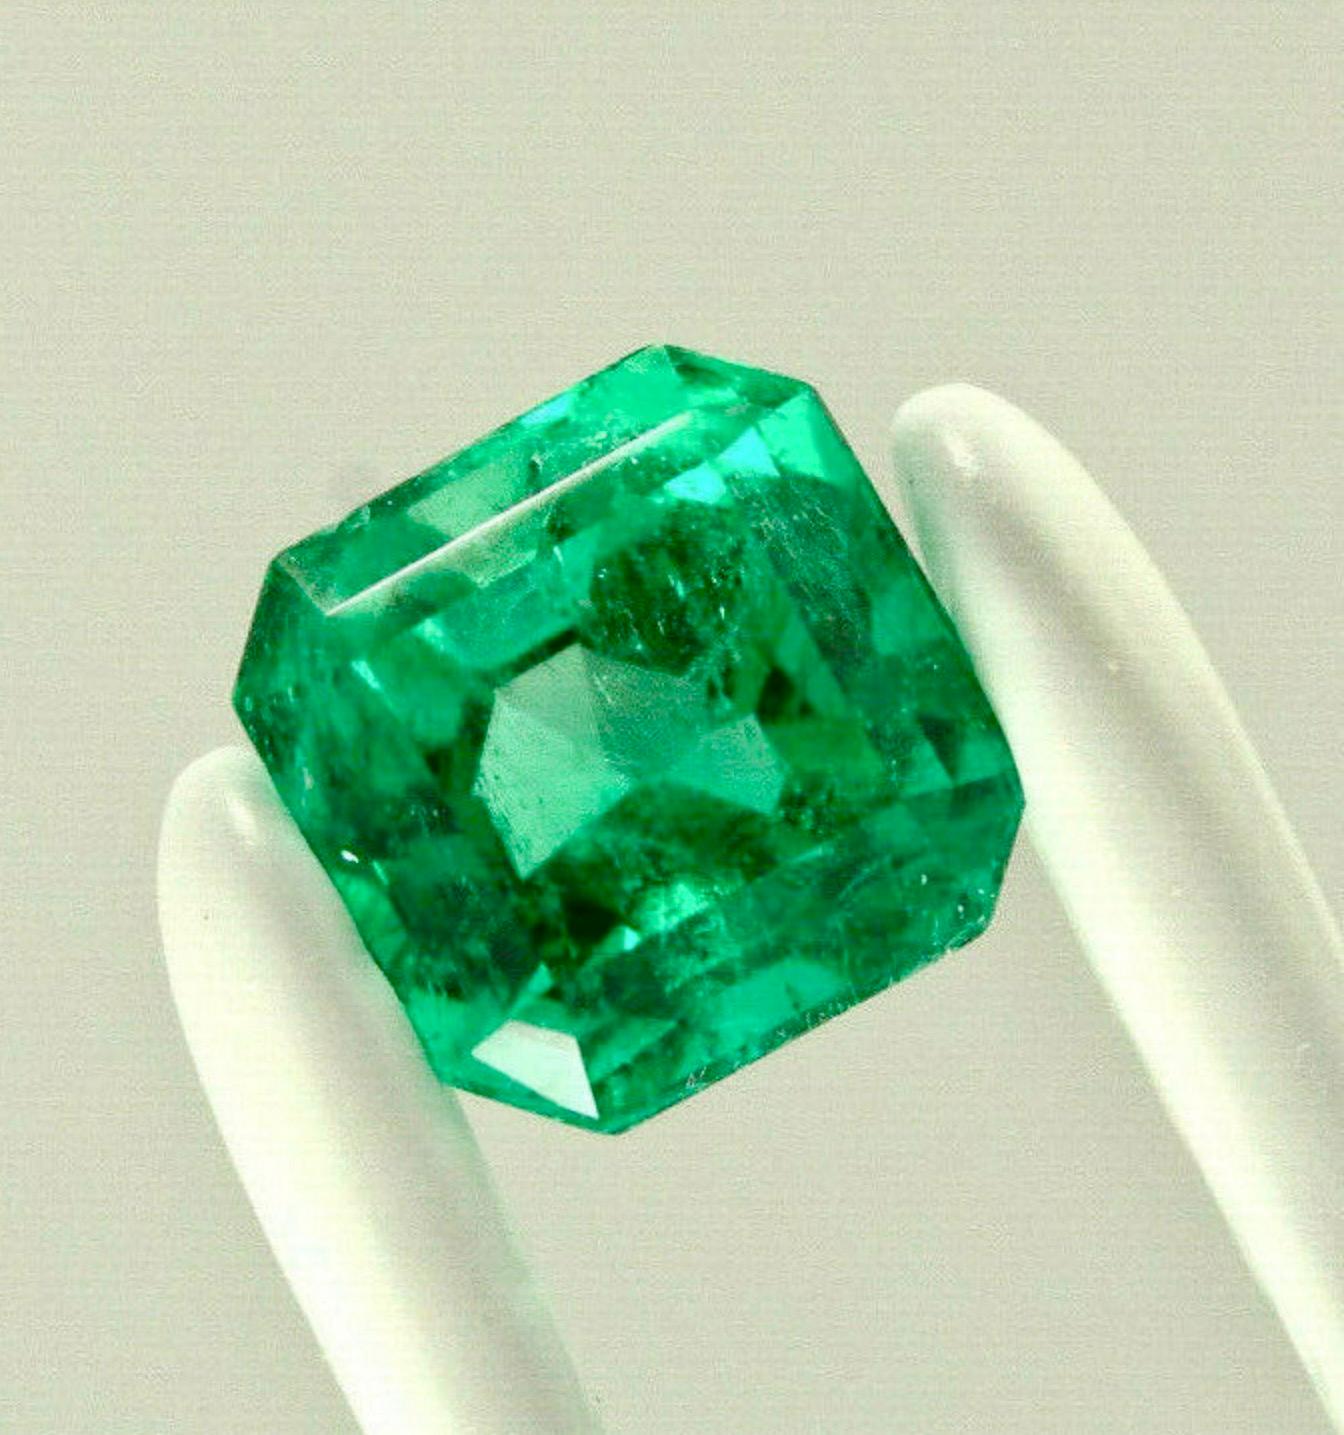 Stone: Natural Colombian Emerald
Weight: 1.09carats
Shape: Asscher Cut
Clarity: Transparent
Luster: Very Good
Color: AAA Muzo Green
Measurements: 6.93mm x 6.62mm
Geographic Origin: Colombia
Treatment: Natural, Moderate Oil

Comments: Due to their